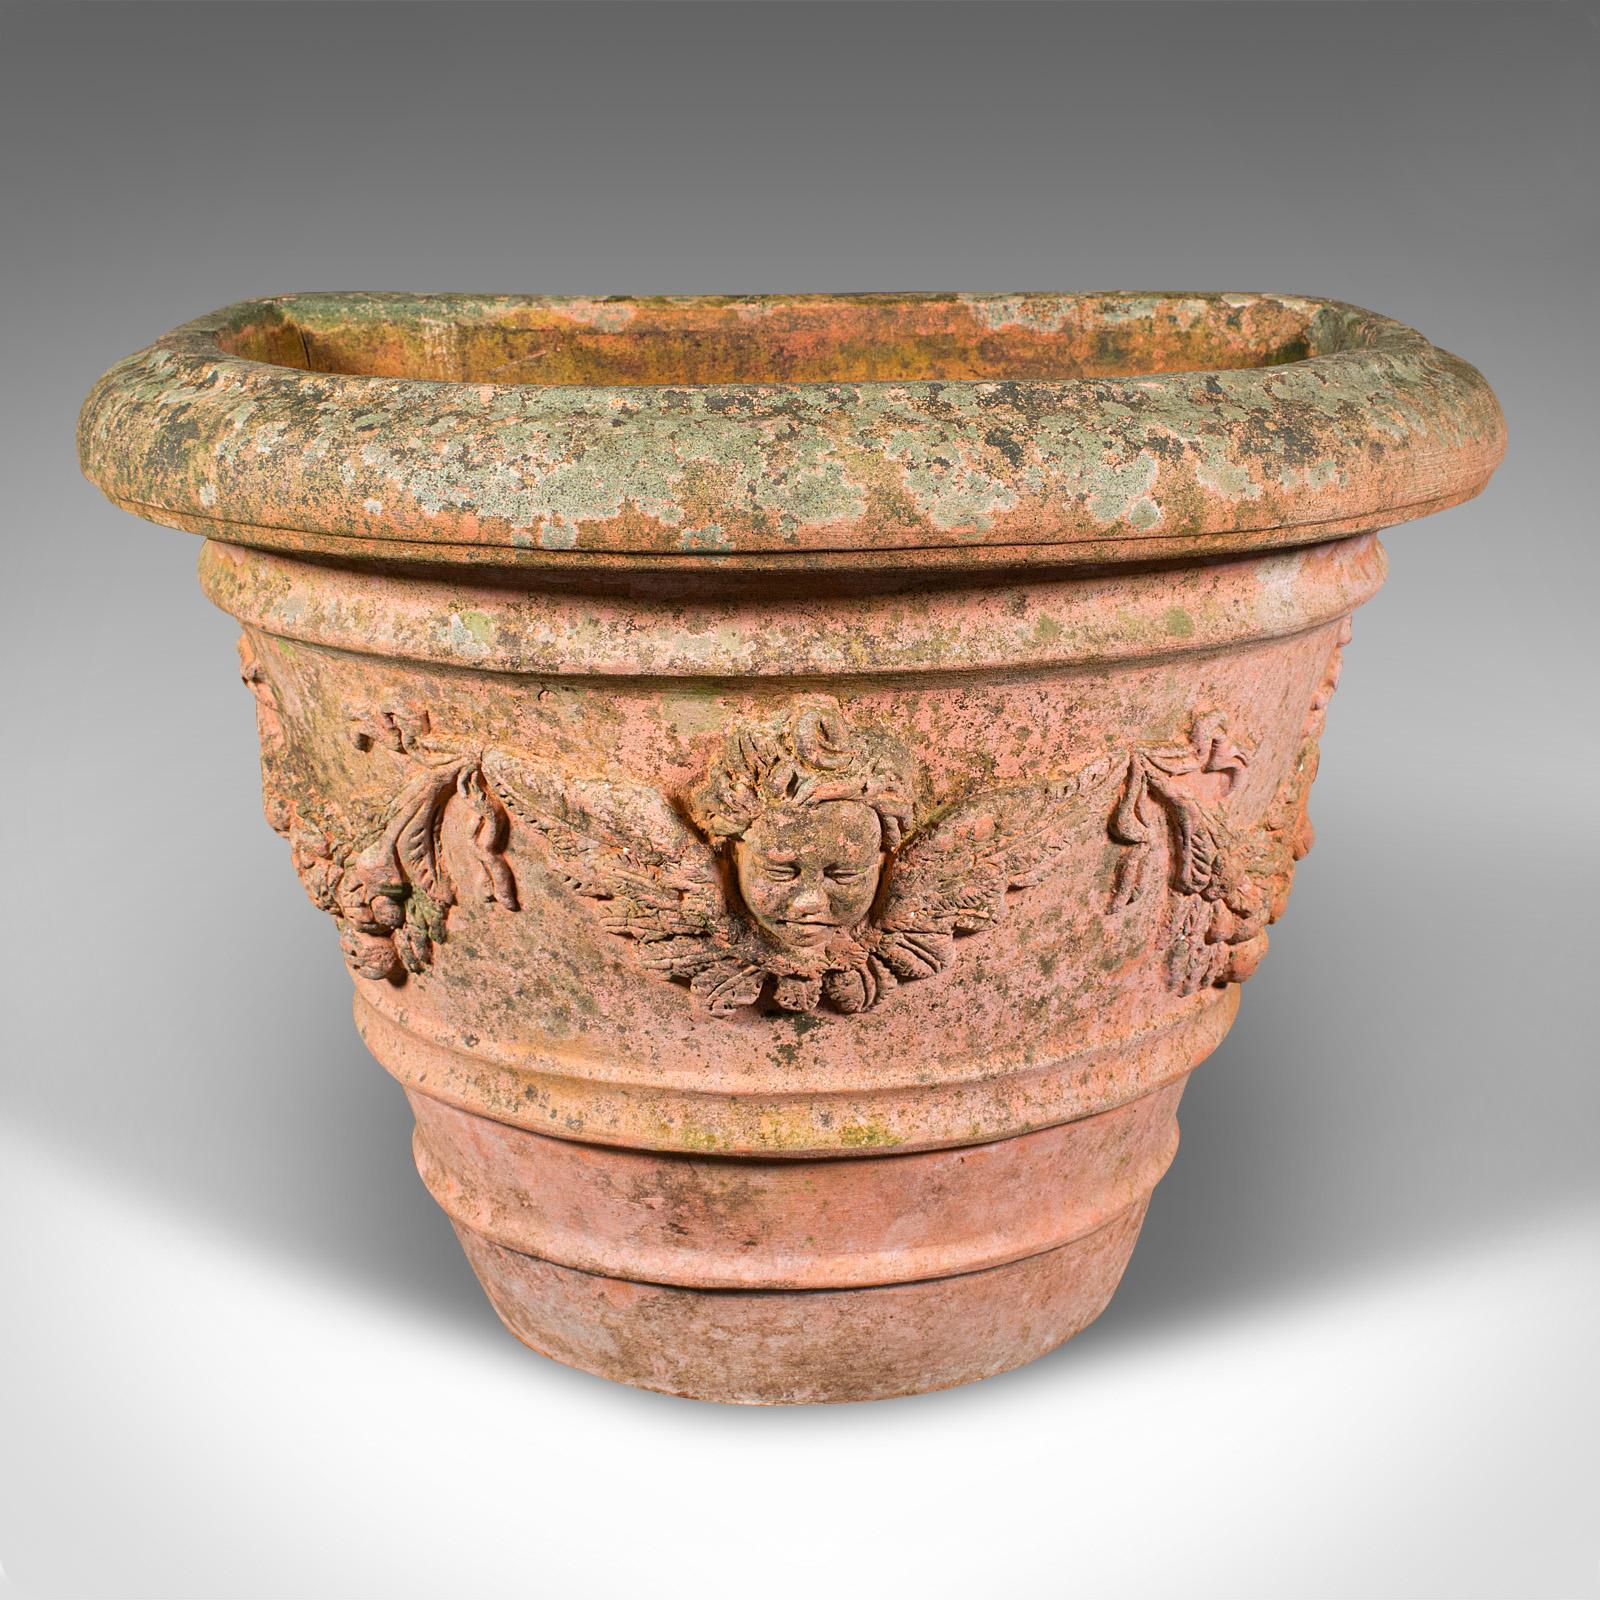 This is a vintage demi-lune planter. An Italian, weathered terracotta jardiniere, dating to the mid 20th century, circa 1960.

Substantial and nicely detailed planter with a lightly weathered appearance
Displays a desirable, naturally aged patina